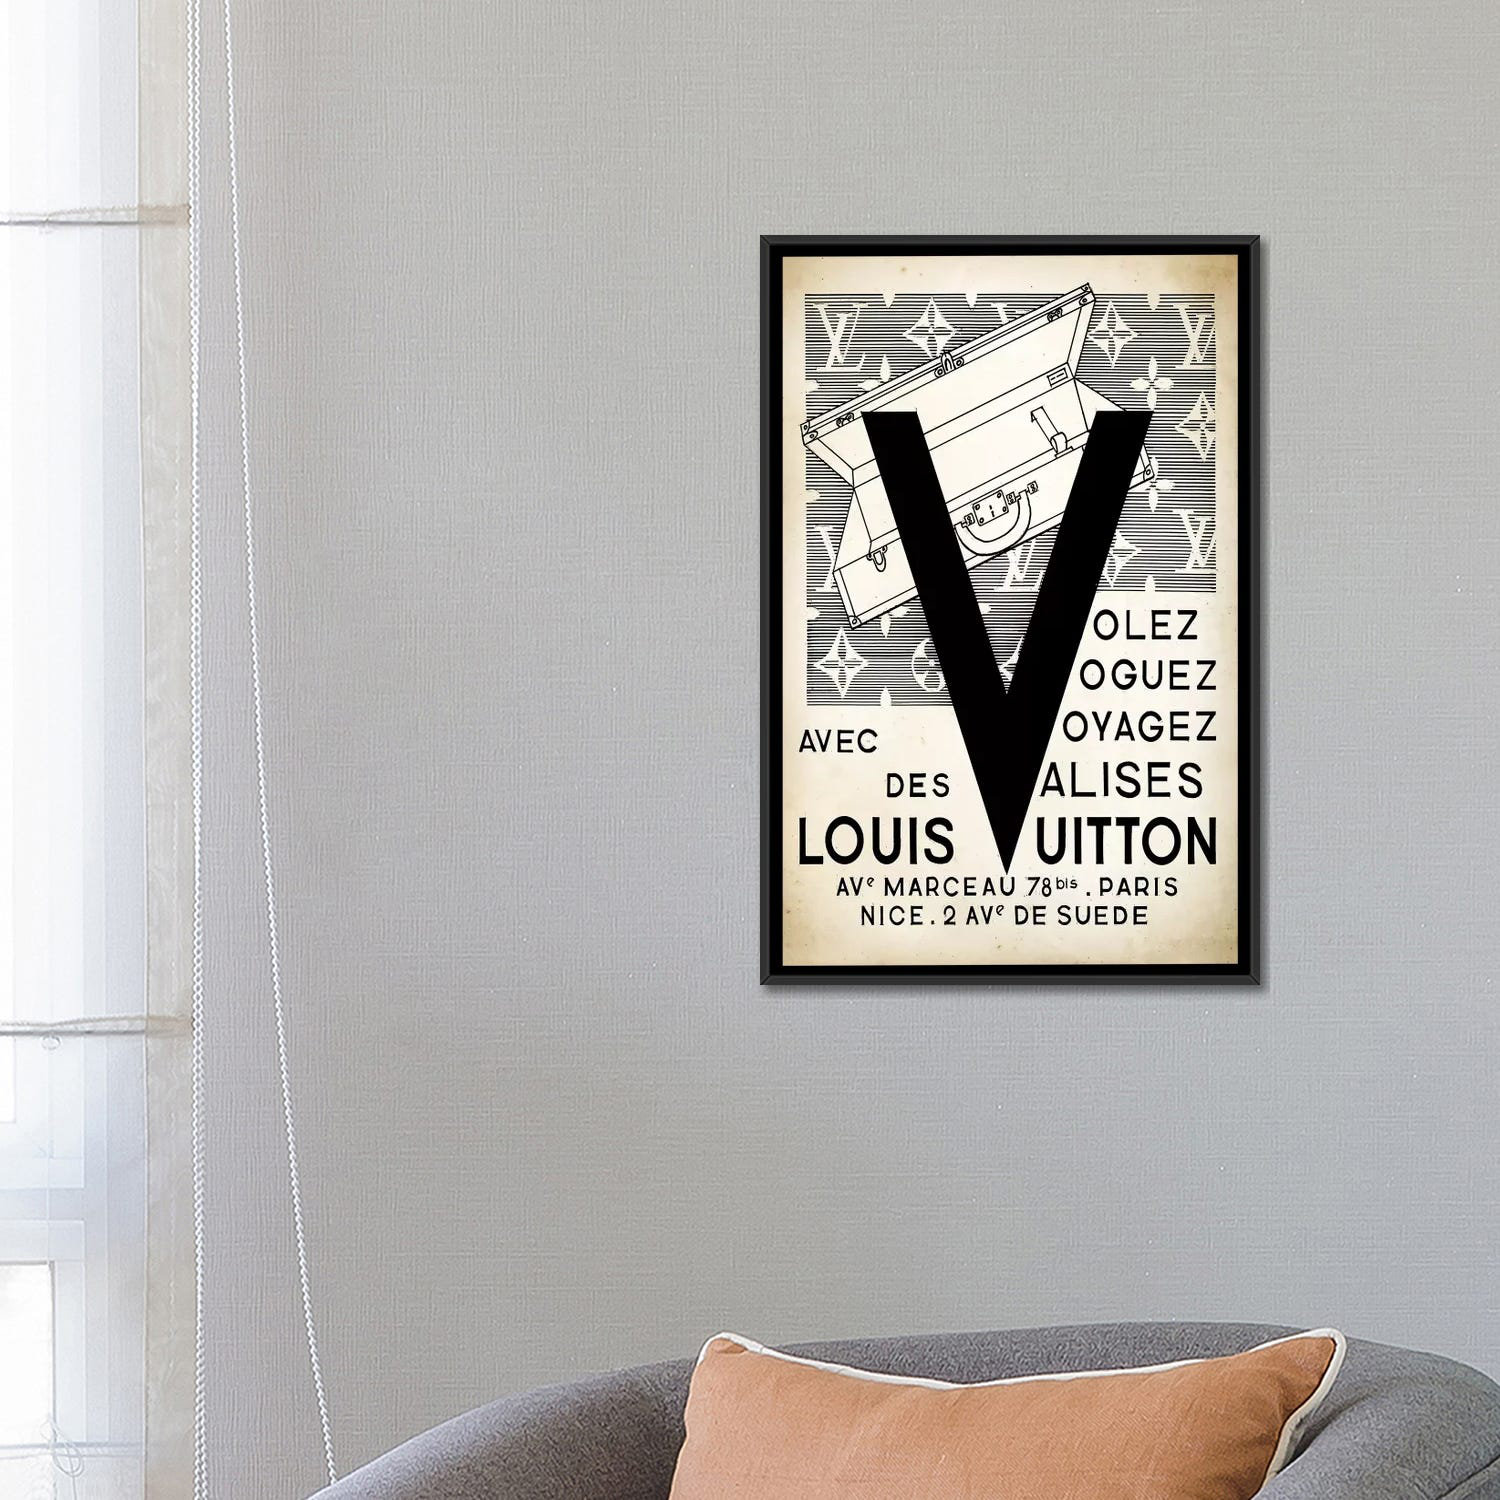 Bless international Vintage Woodgrain Louis Vuitton Sign 2 by  5by5collective - Advertisements - Wayfair Canada